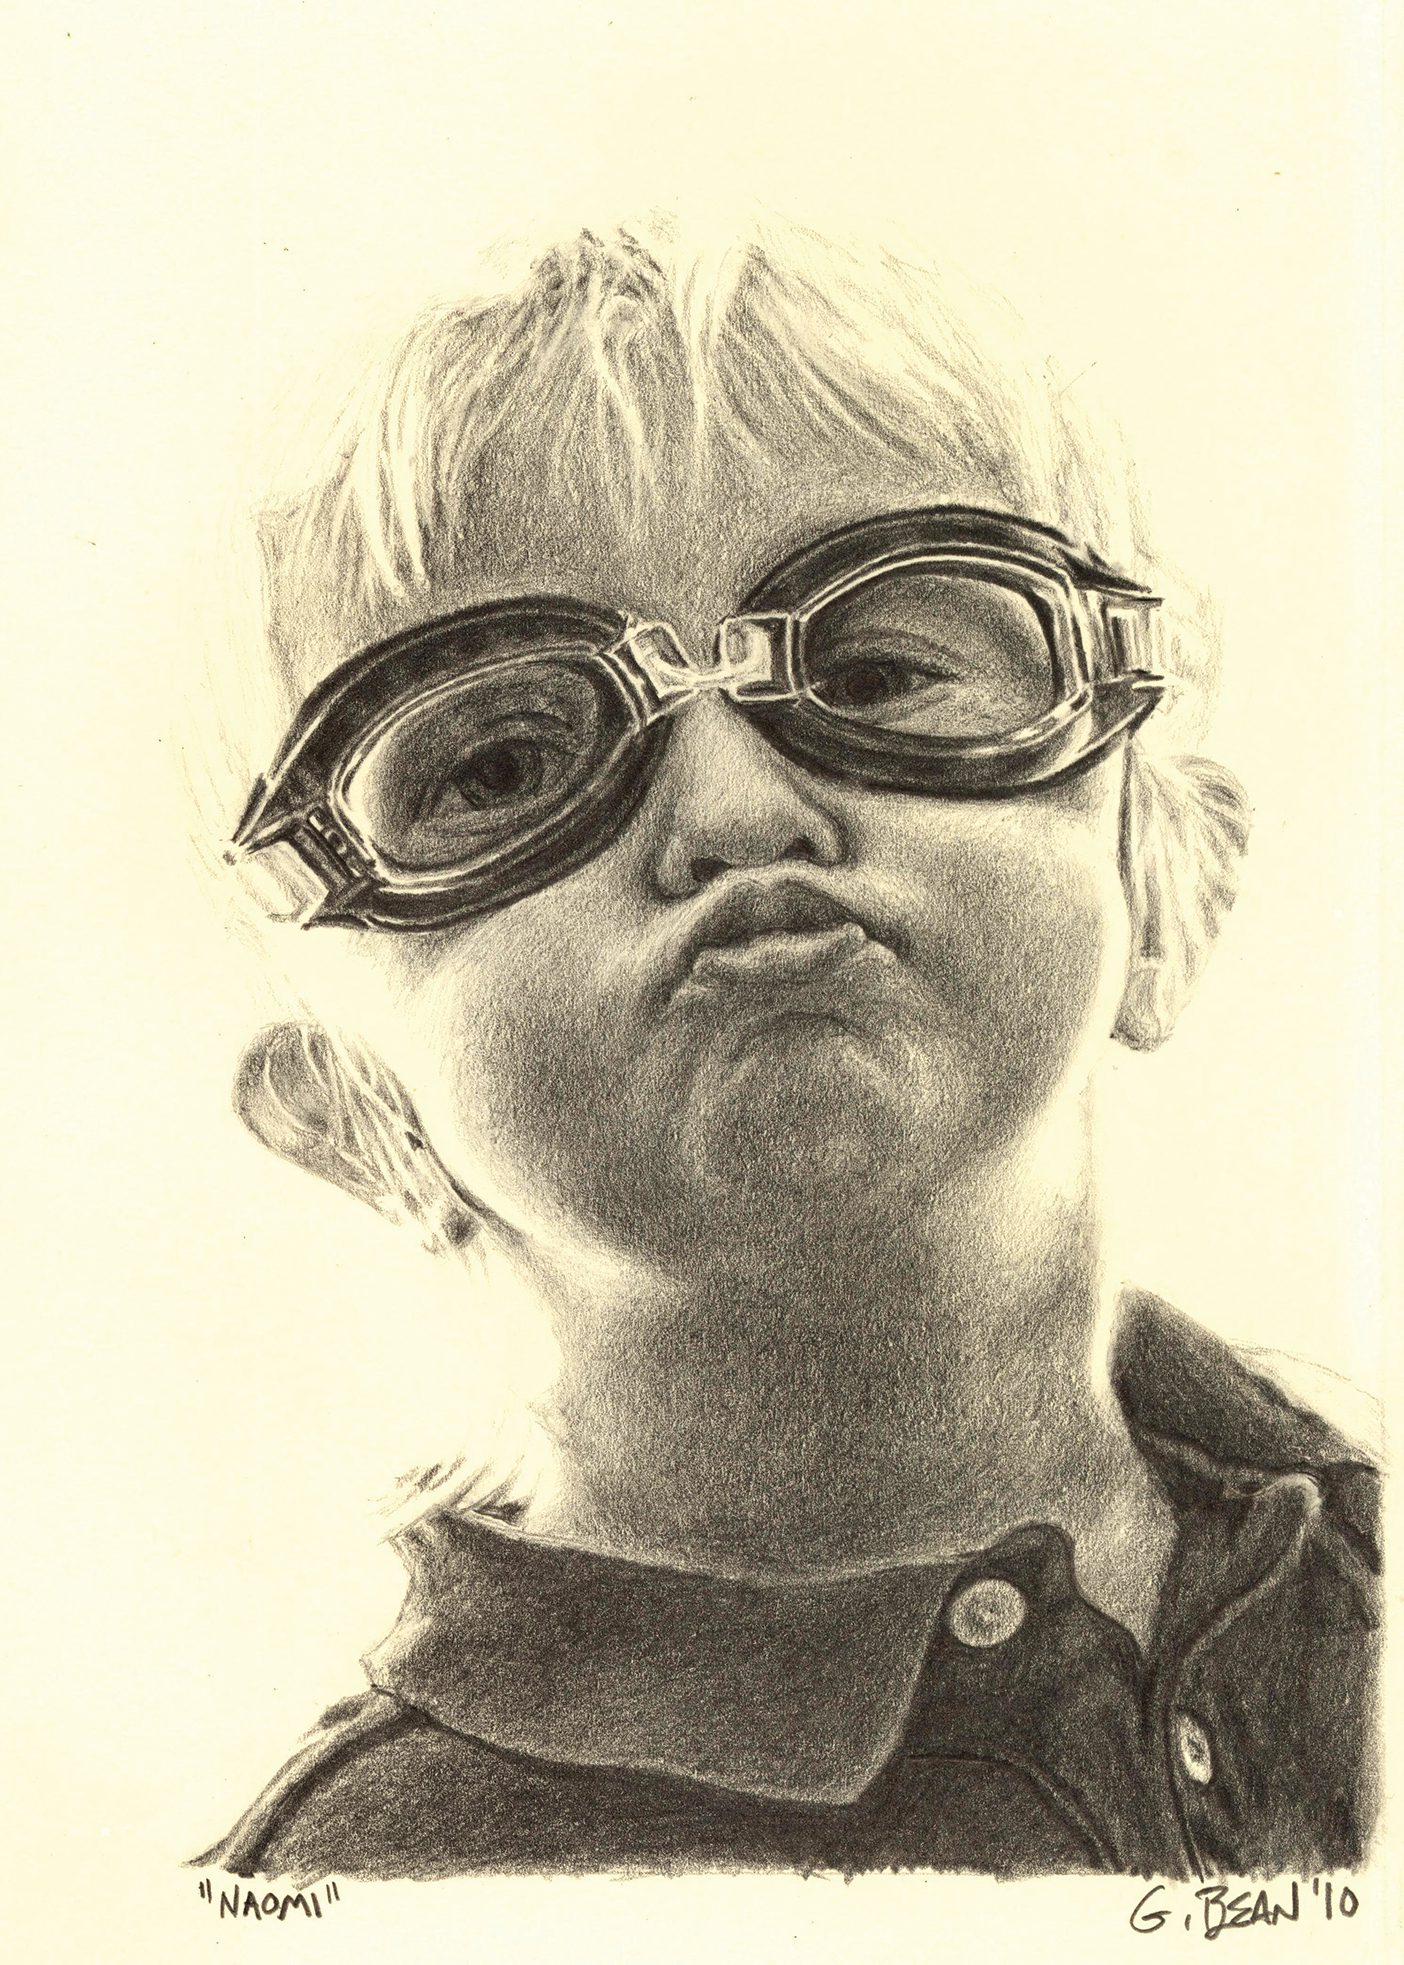 Greg Bean draws with graphite, a picture of a child wearing goggles and making a kissy face.